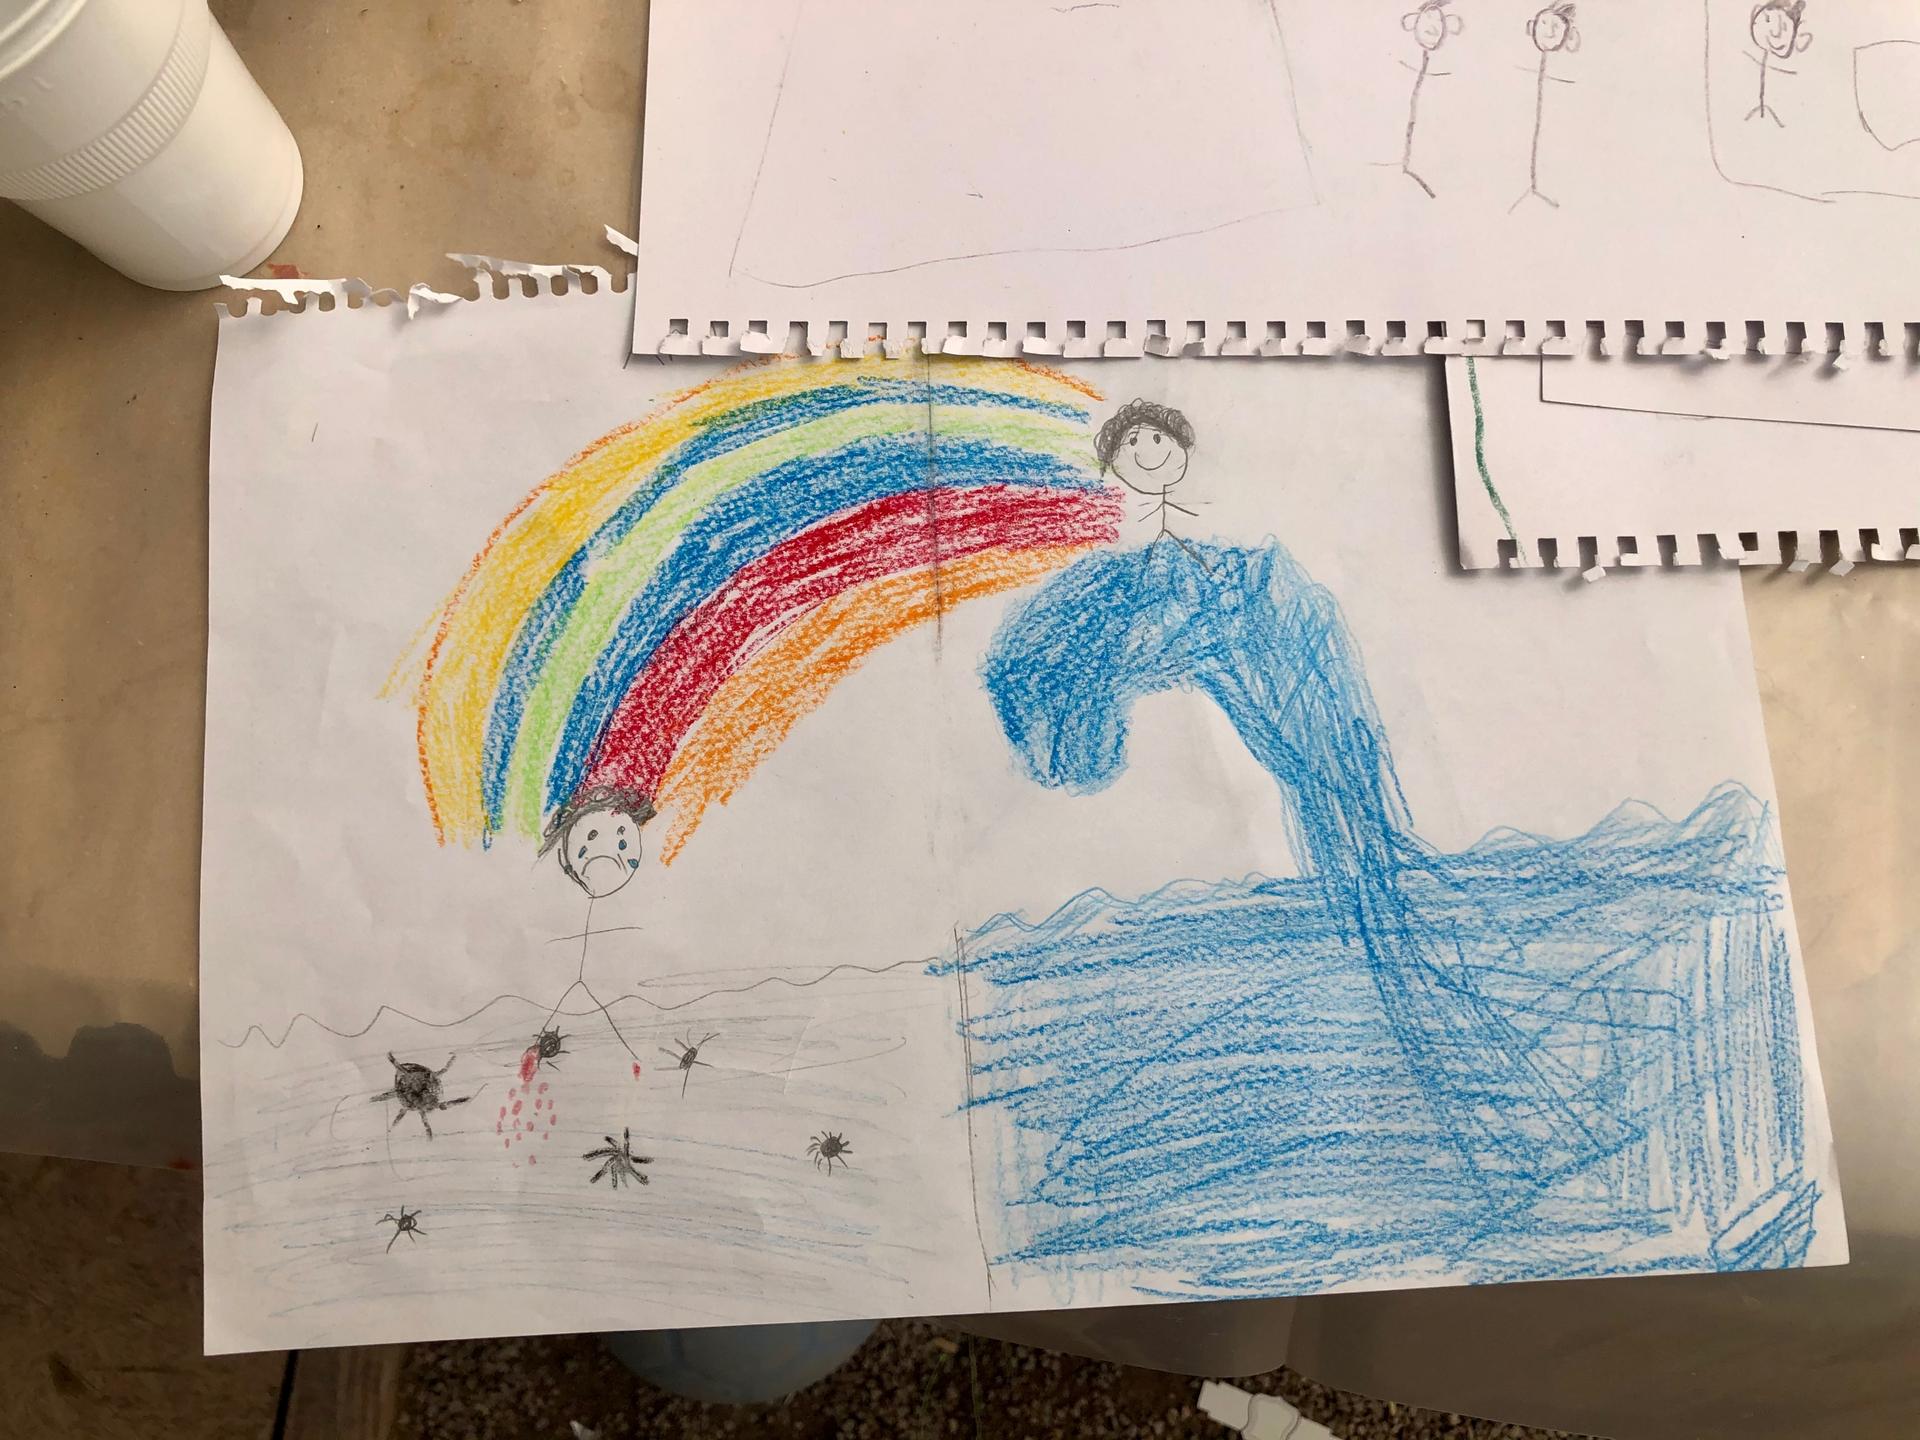 For one of their projects, children were asked to draw two worlds: the reality they live in today and an imaginary world they would like for themselves, and then connect the two with a bridge.